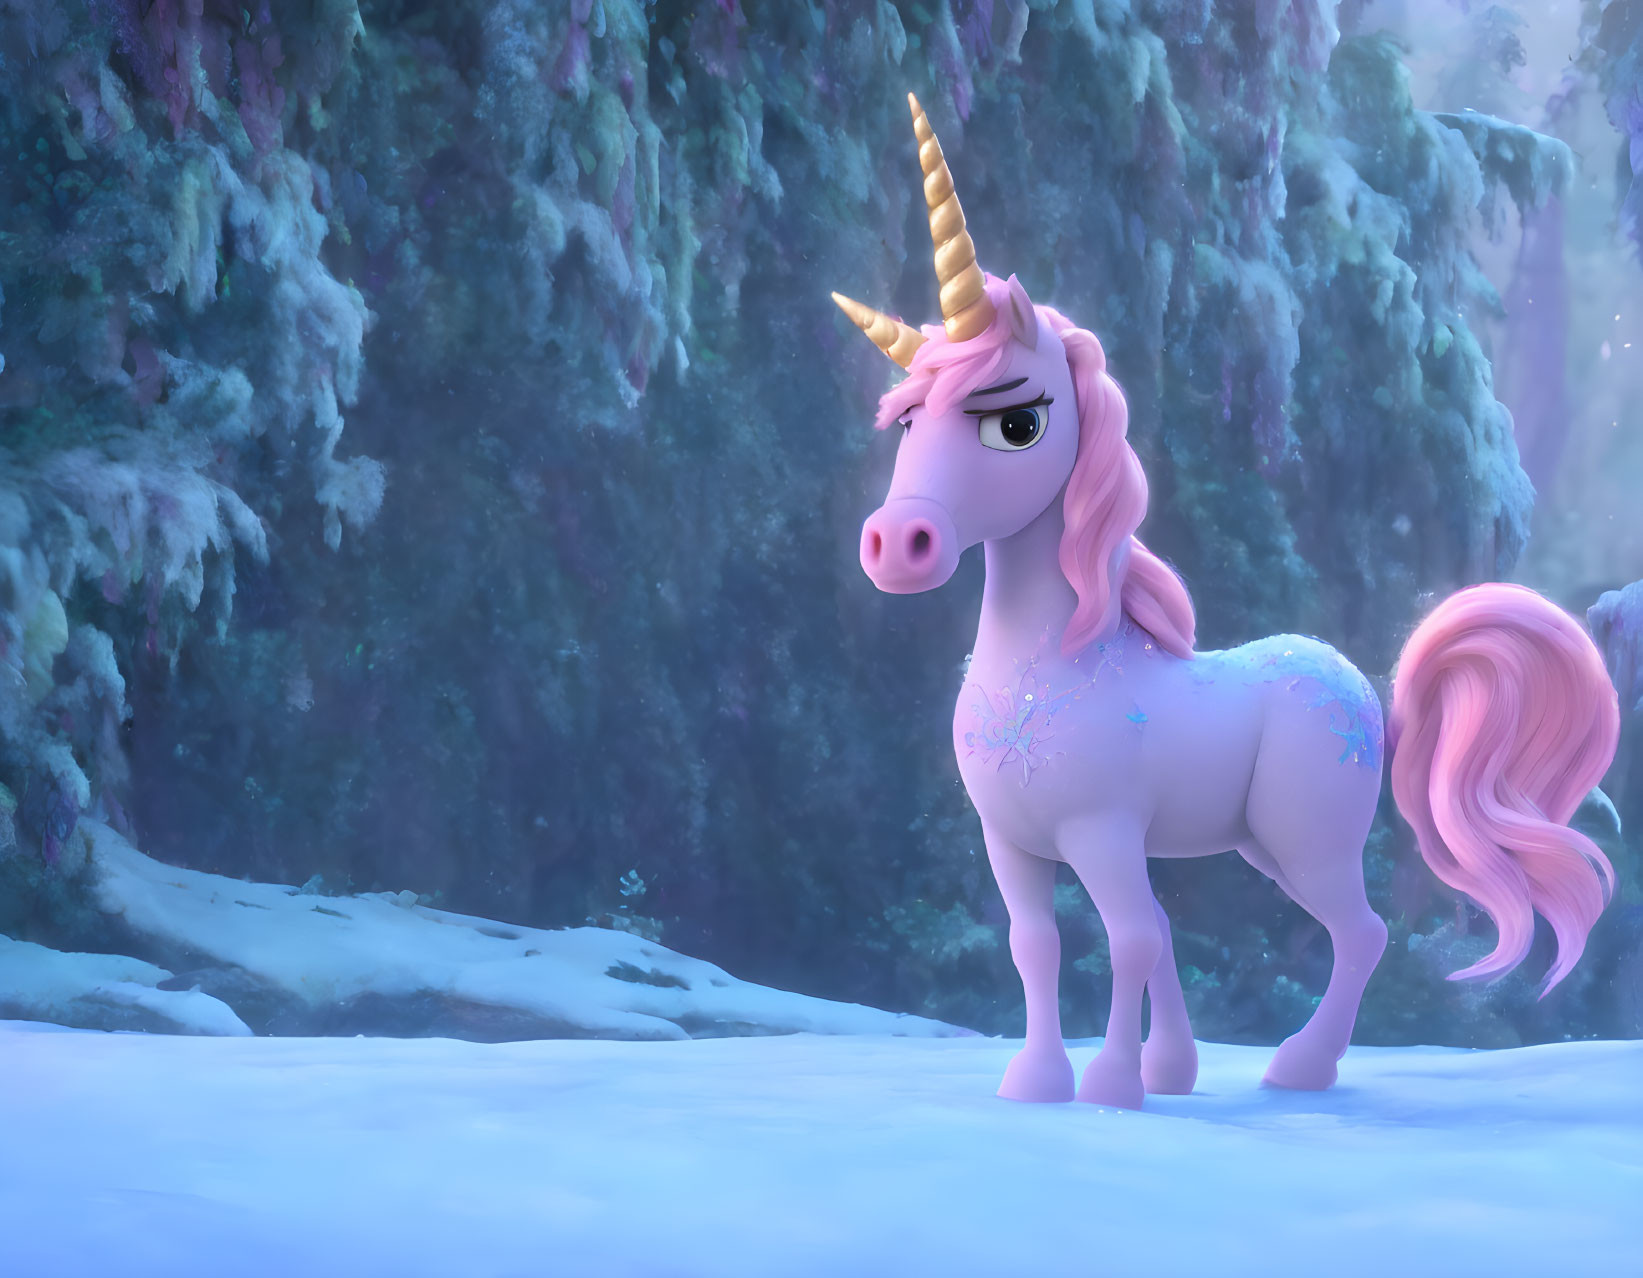 Pink unicorn with golden horn in snowy forest scene.